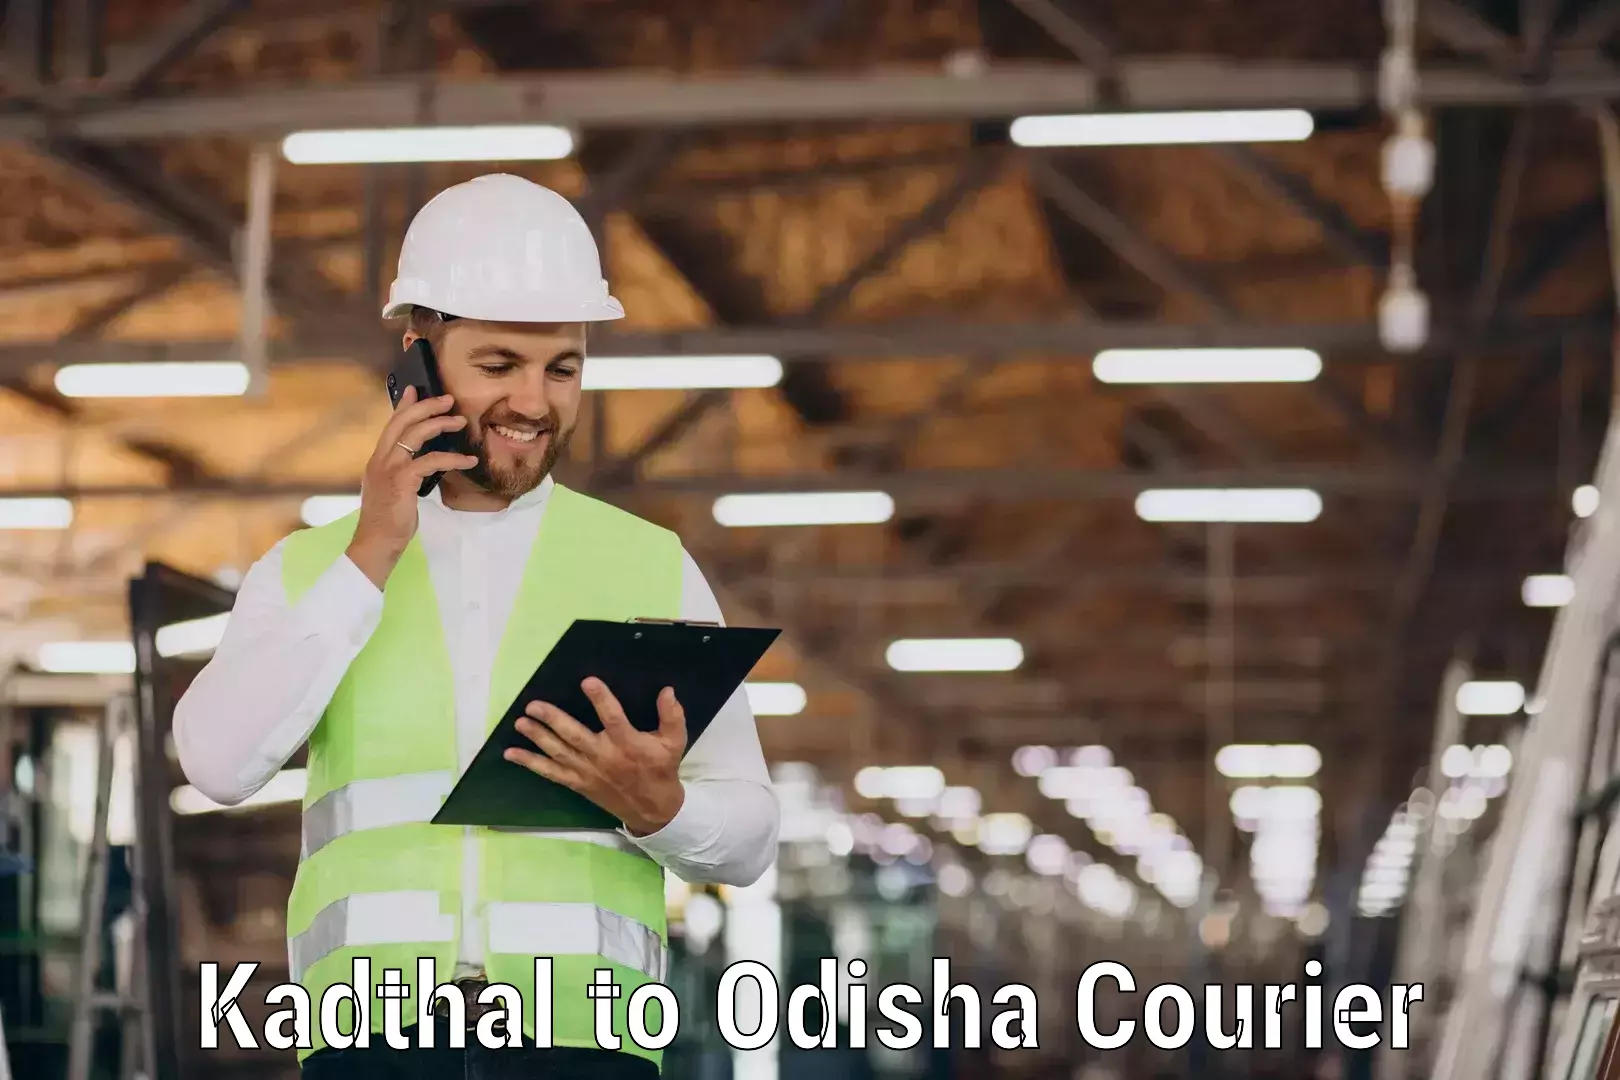 State-of-the-art courier technology Kadthal to Phulbani